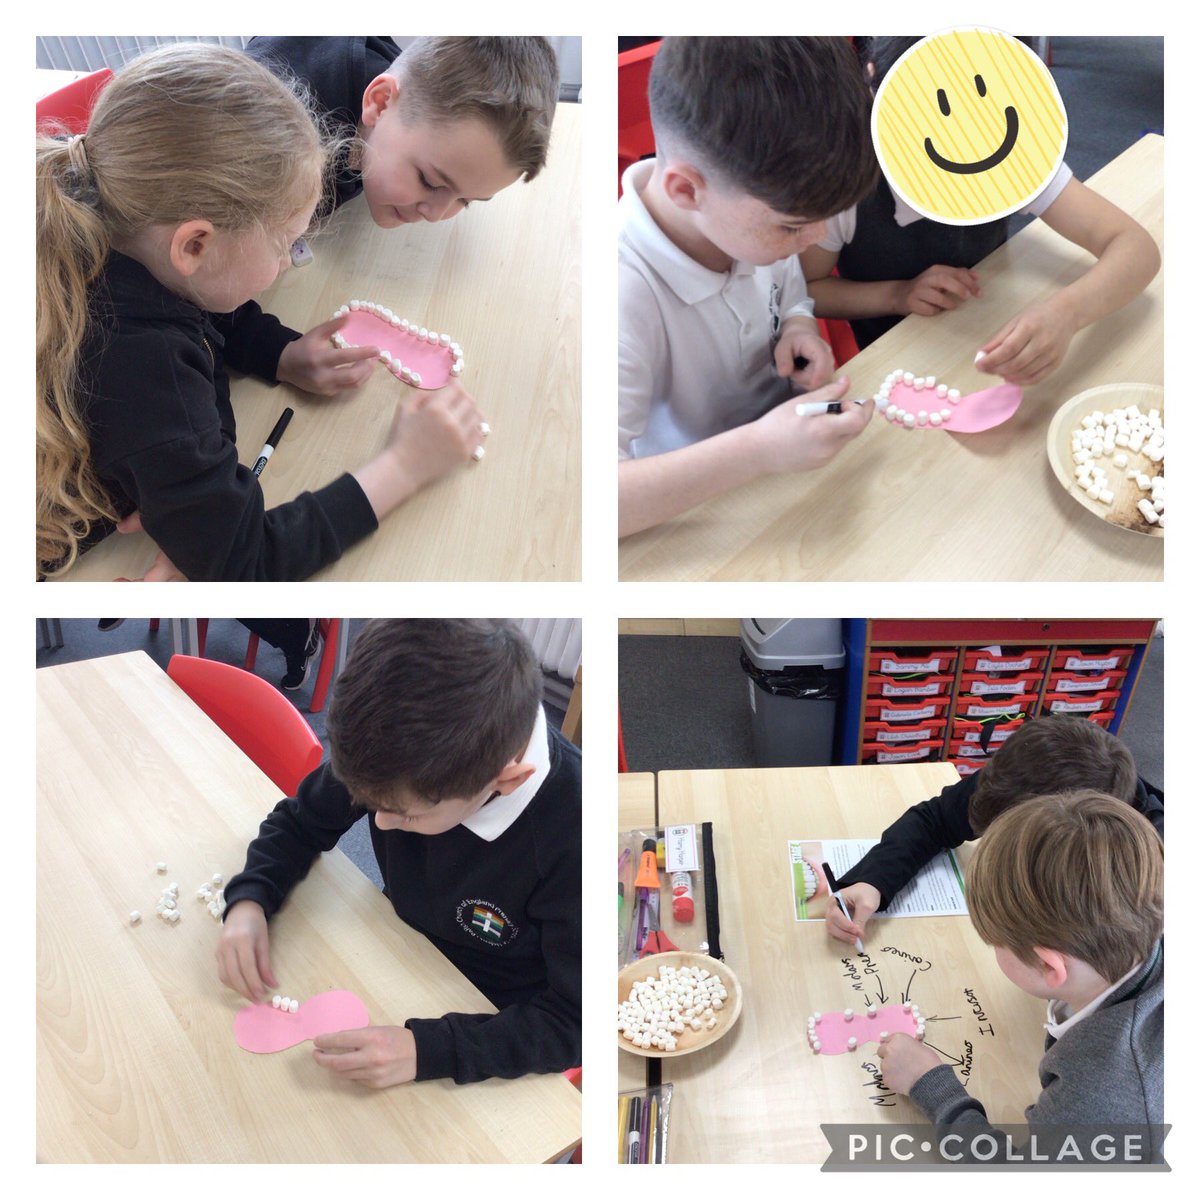 We made start on our new science unit today! The digestive system, starting with teeth and their functions! We used marshmallows to create our own set of teeth and the labelled them! Well done year 4 ☺️👏🦷😁#parishscientists #science @parishschool1